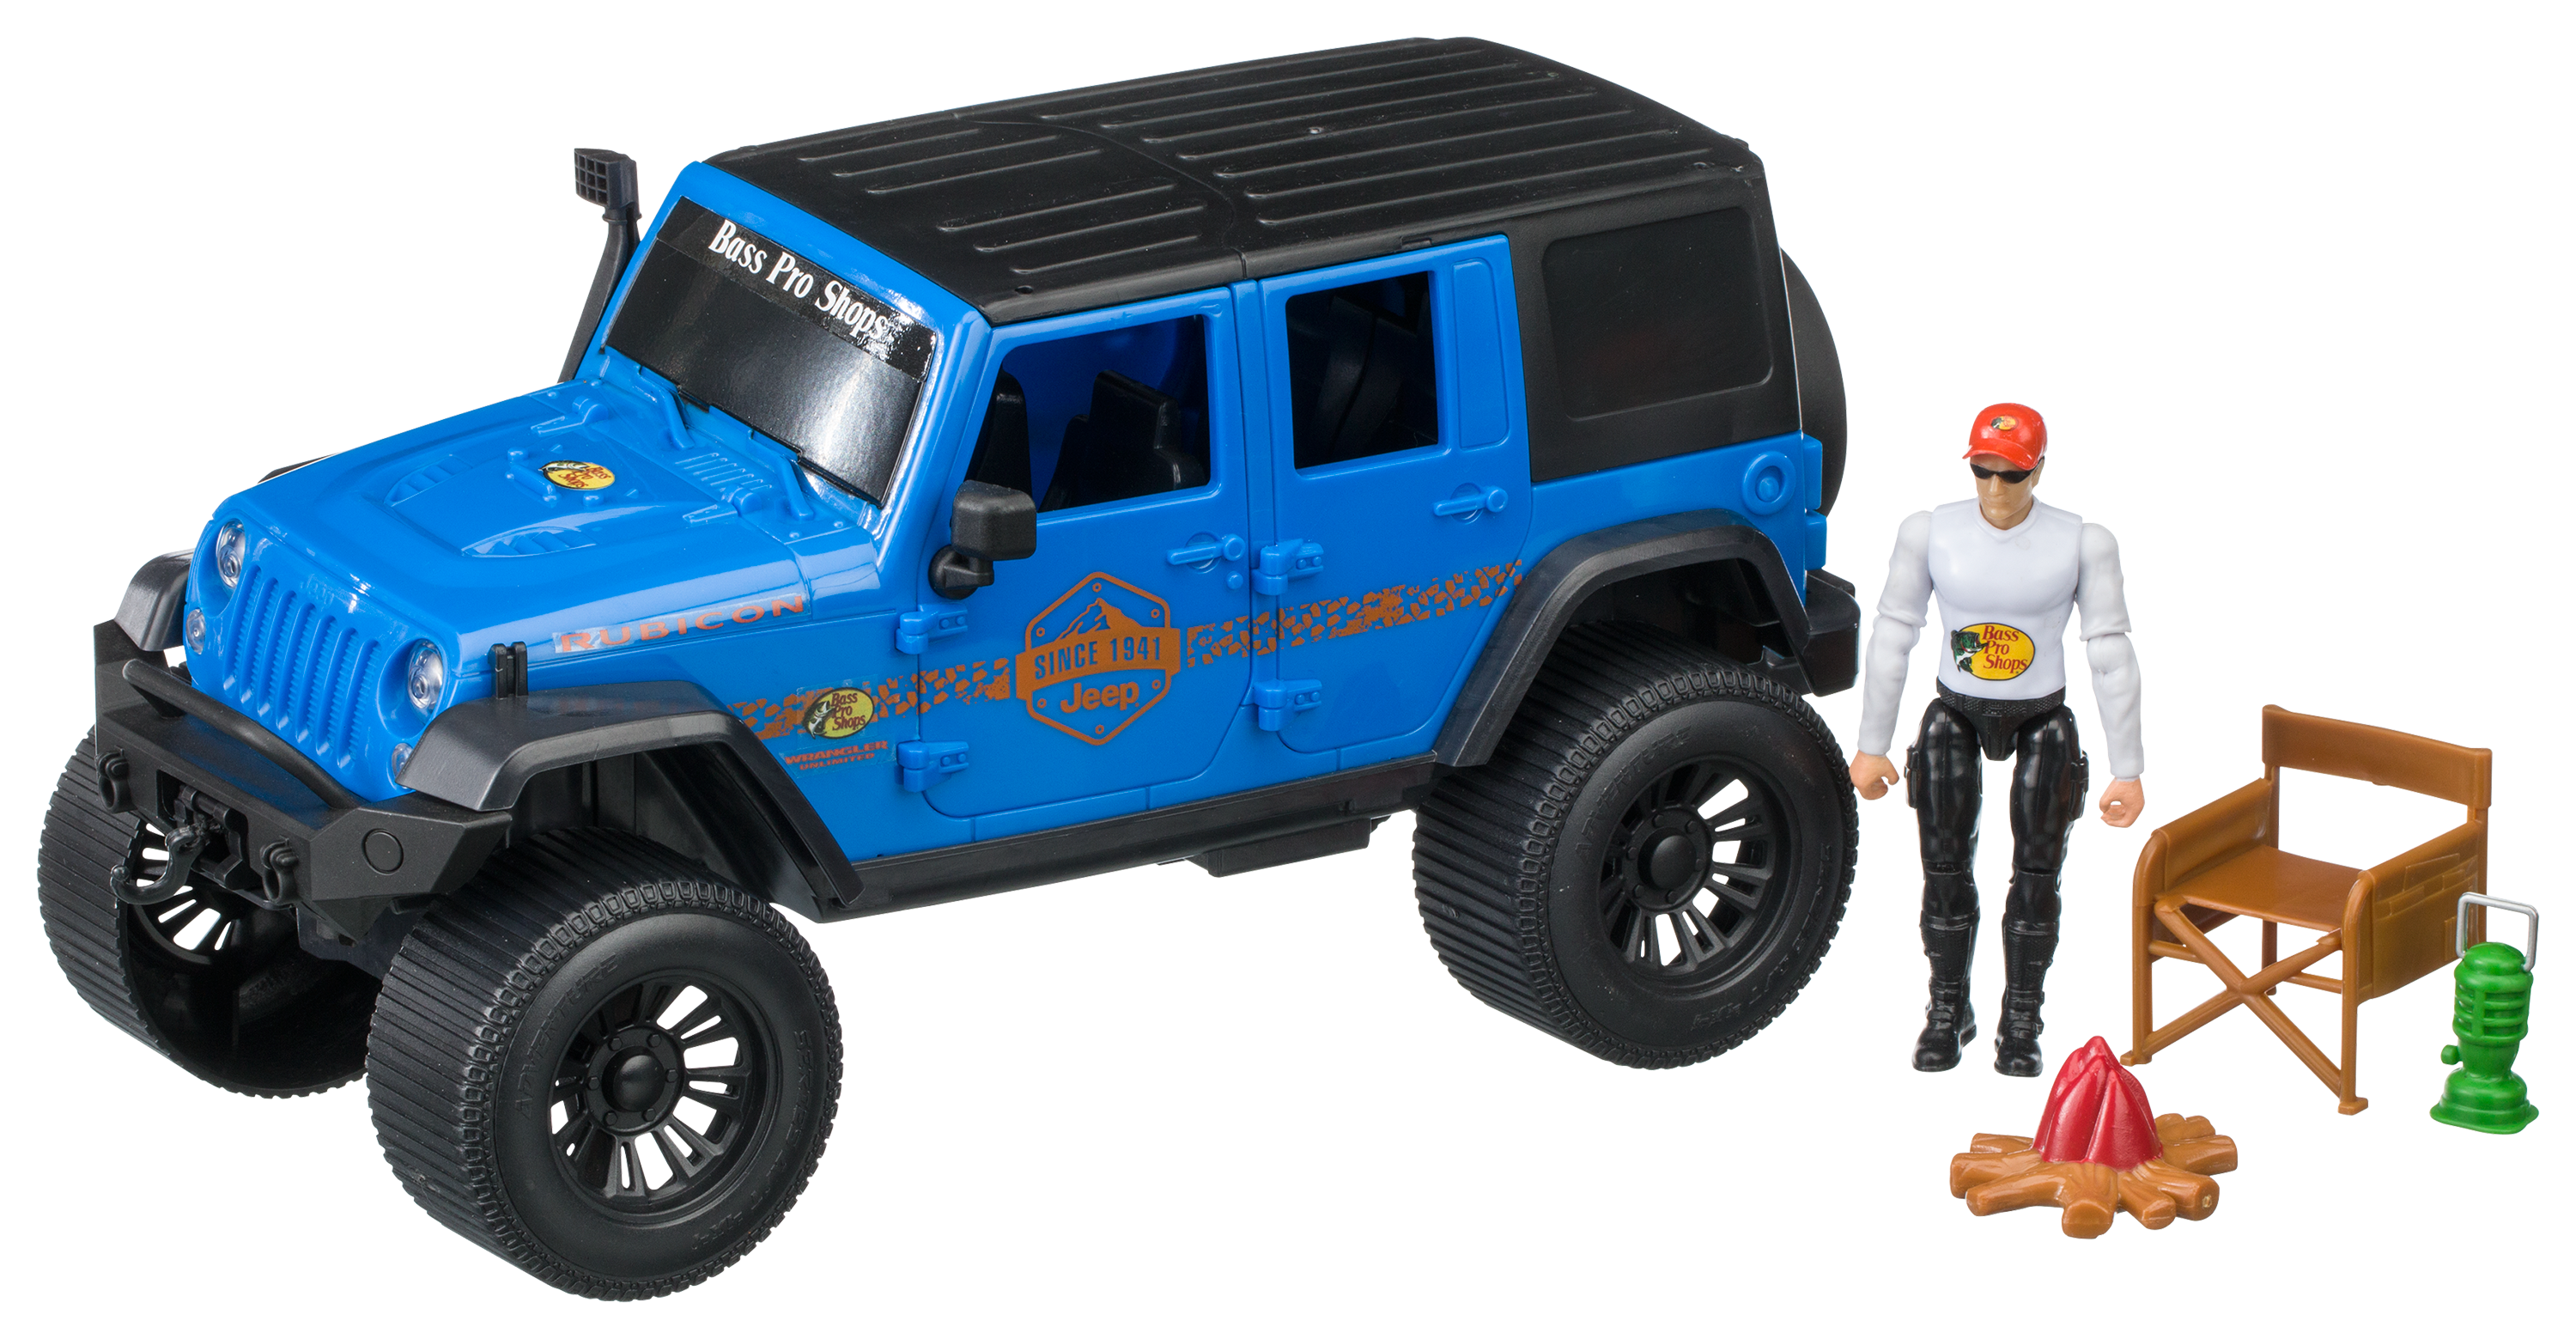 Bass Pro Shops Licensed Jeep Camping Playset for Kids